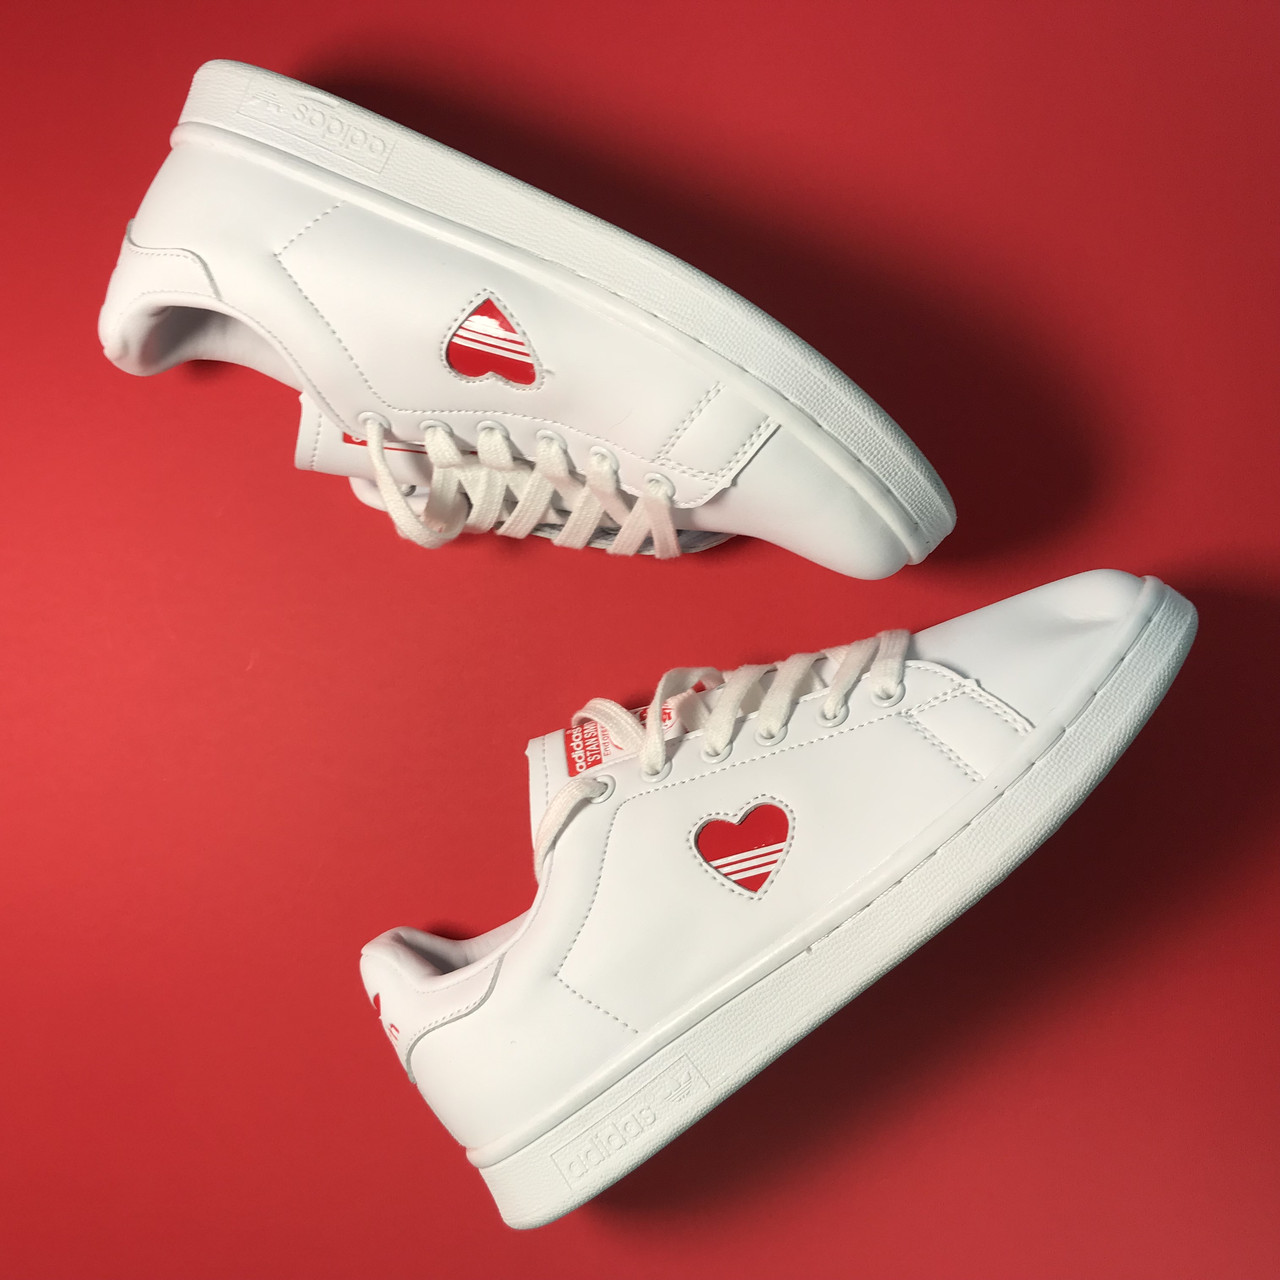 stan smith red heart